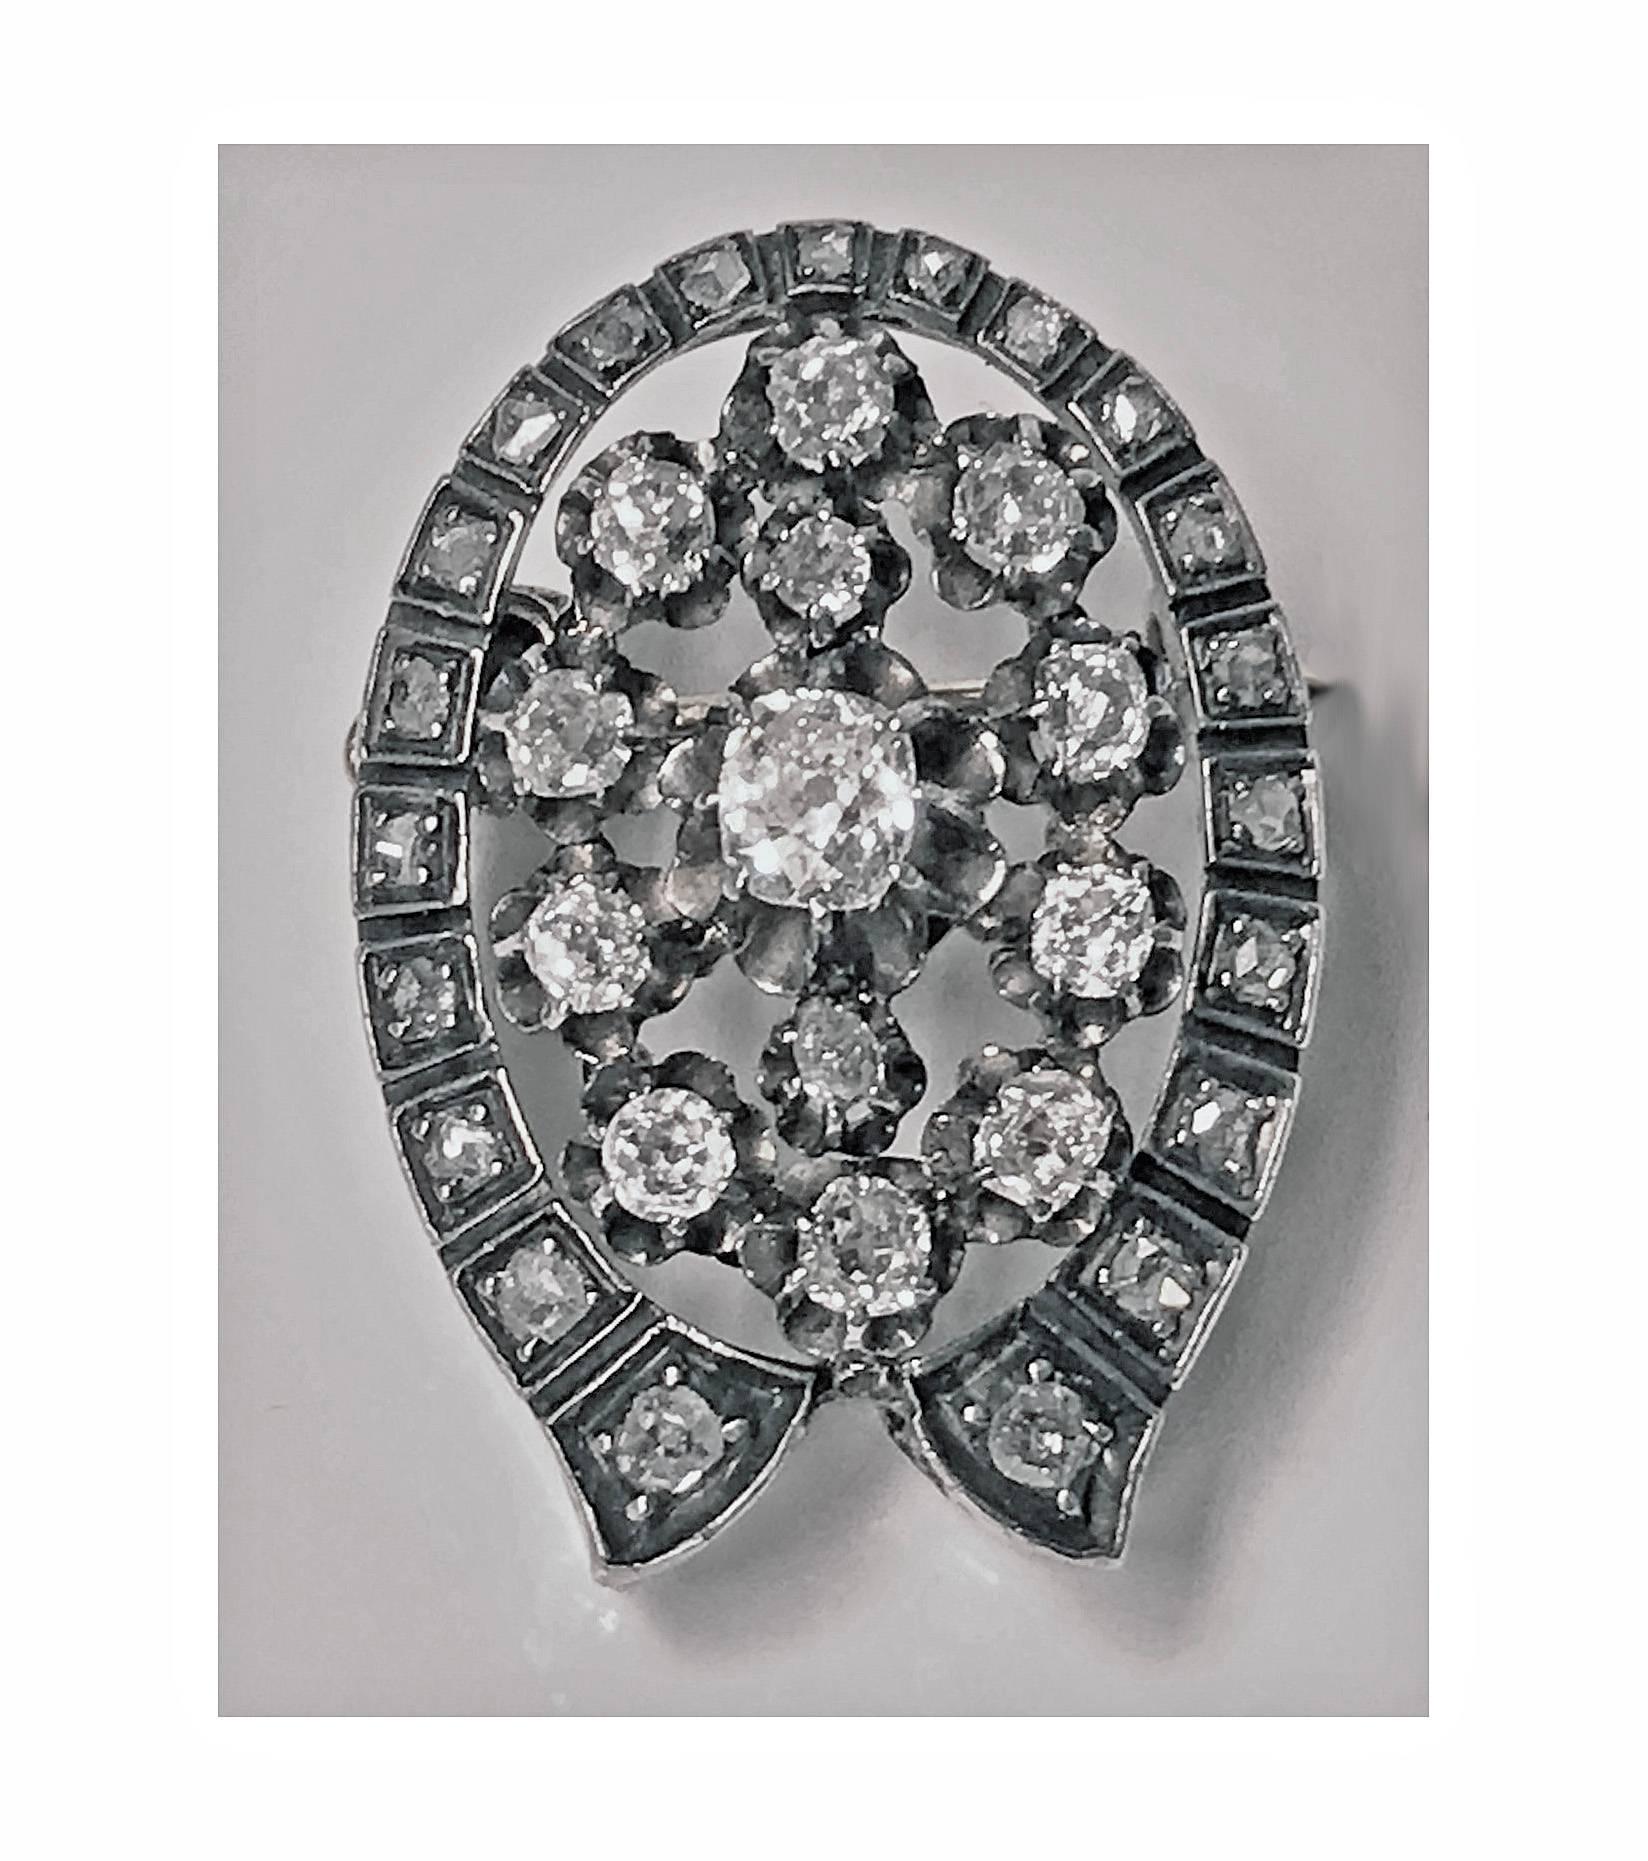 Antique 19th century diamond brooch pendant mounted in silver and 18-karat gold, France, circa 1870. Oval horseshoe shape set with 34 mixed old mine and rose cut diamonds, approximately 2.20-carat, total diamond weight, pierced gallery basket